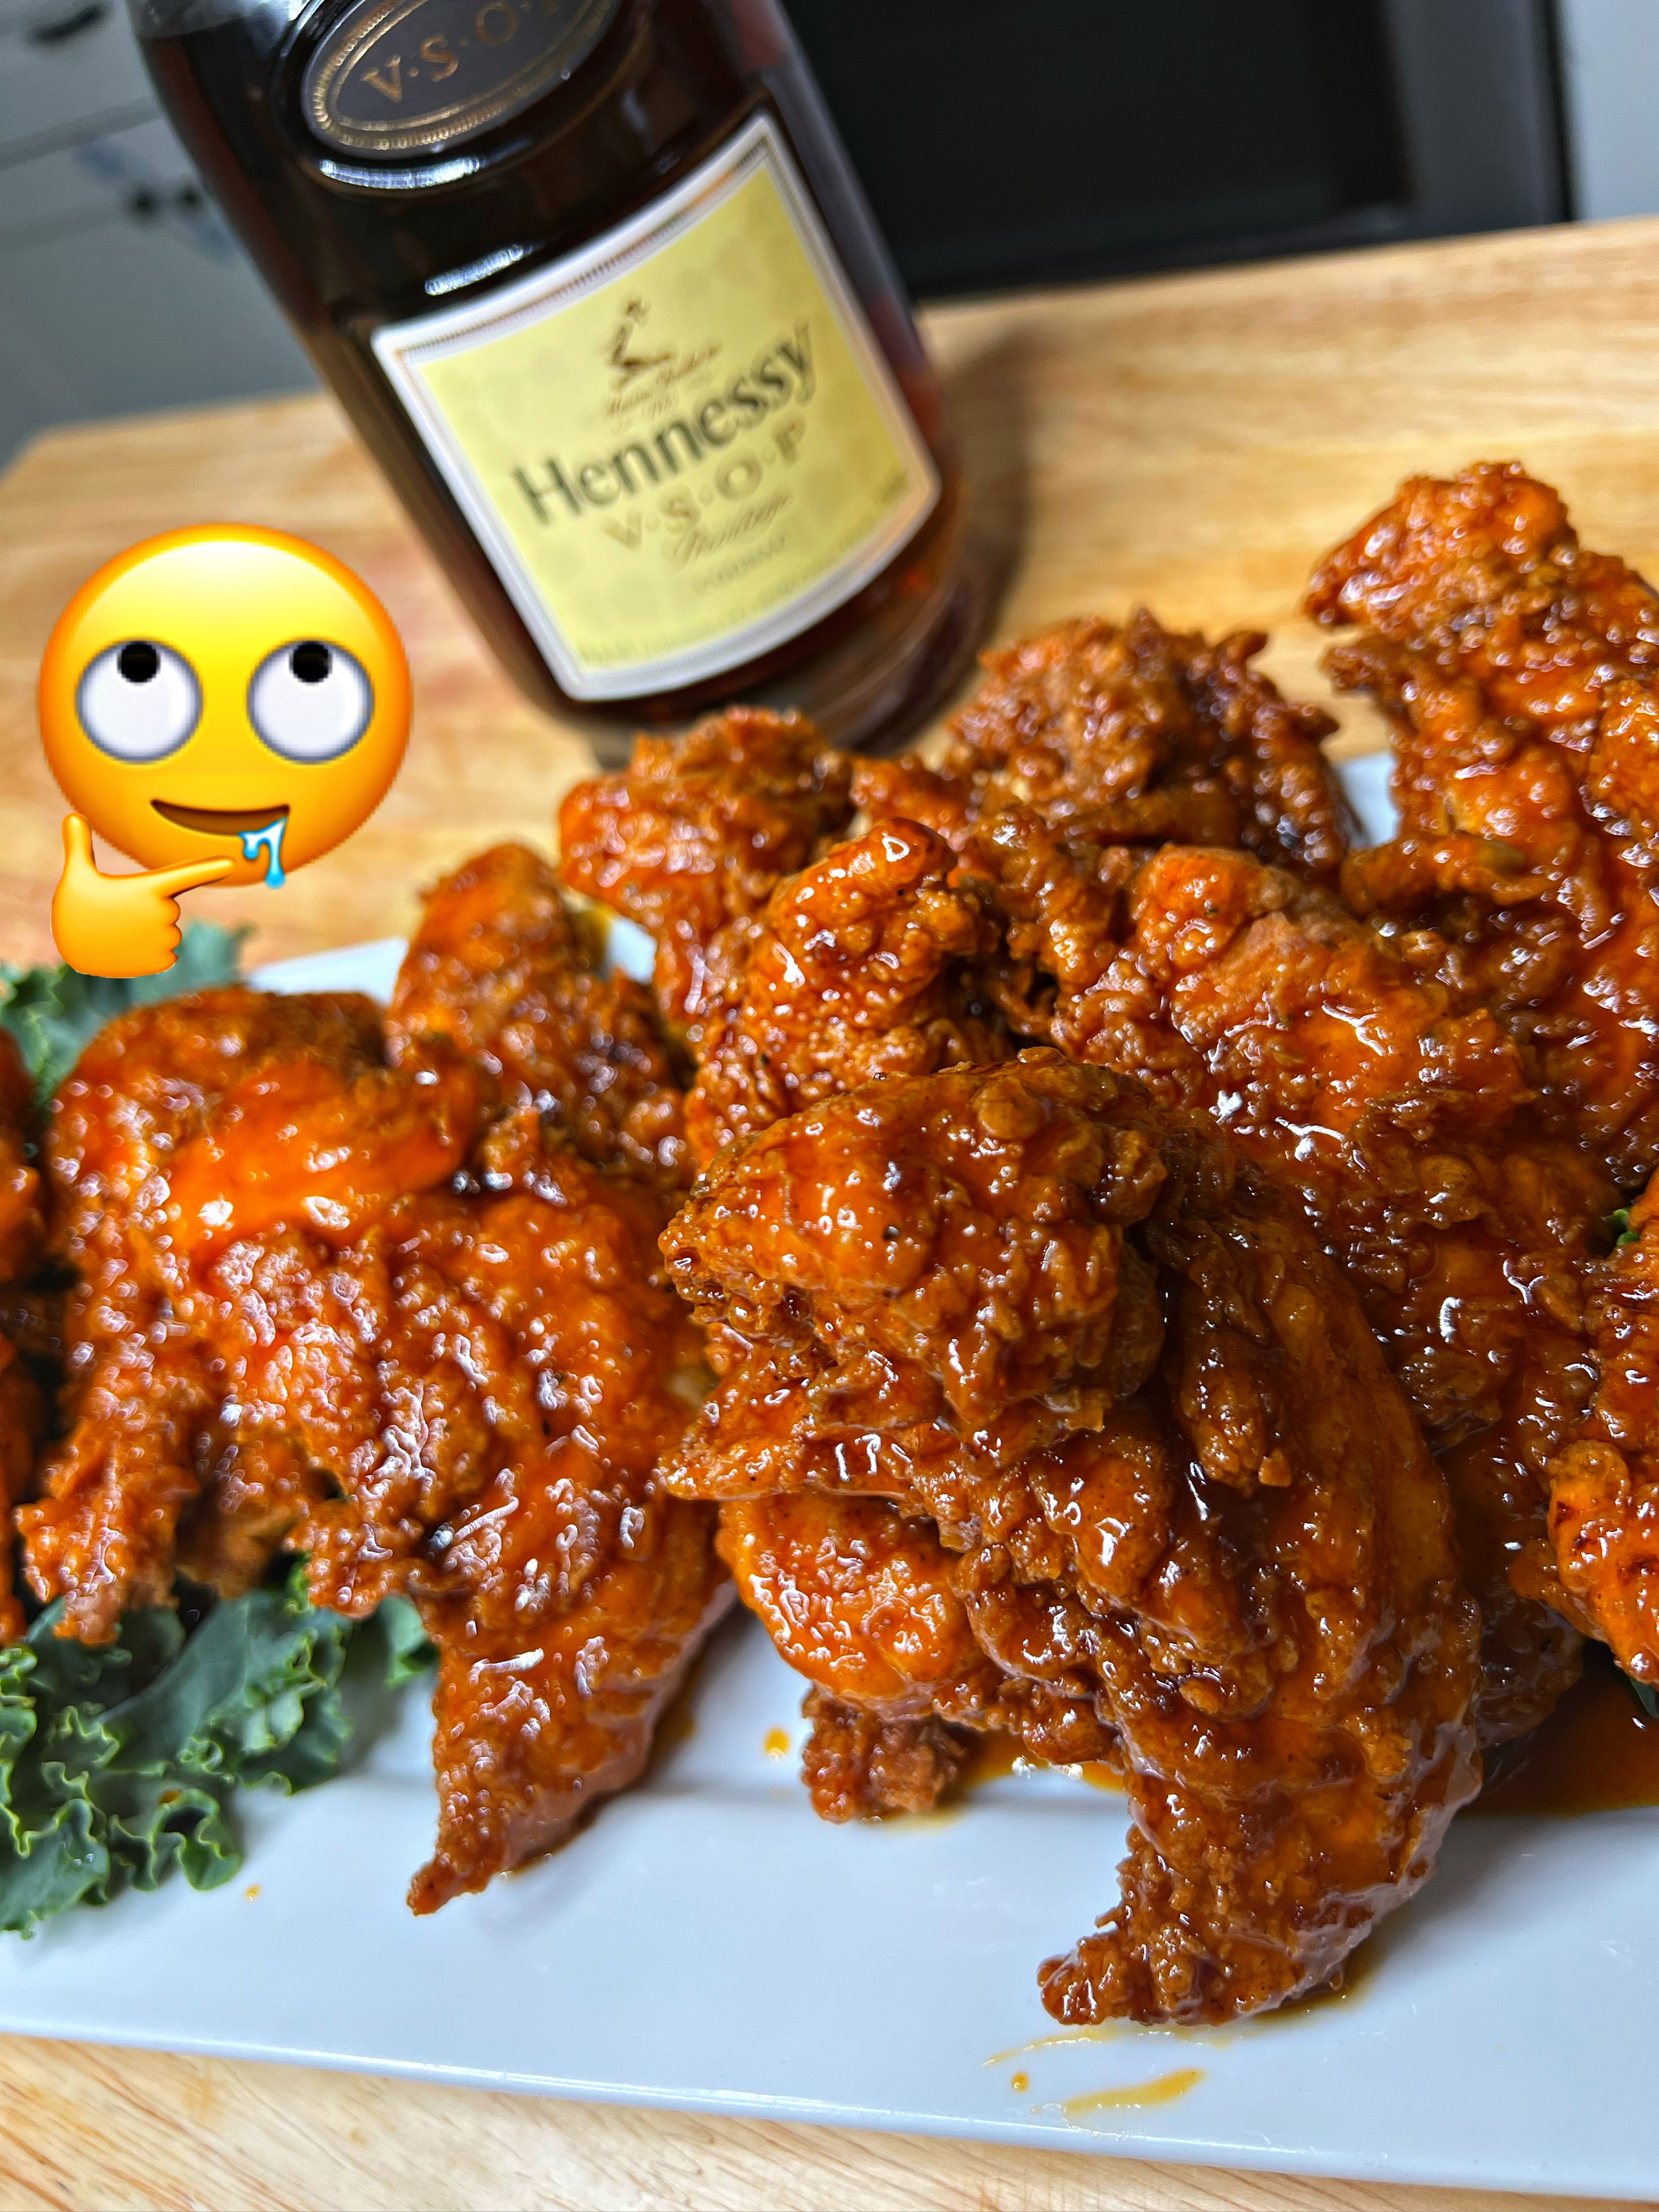 I know these wings gon be bangin!! “YES THAT MUCH SEASONING” by @kimmy